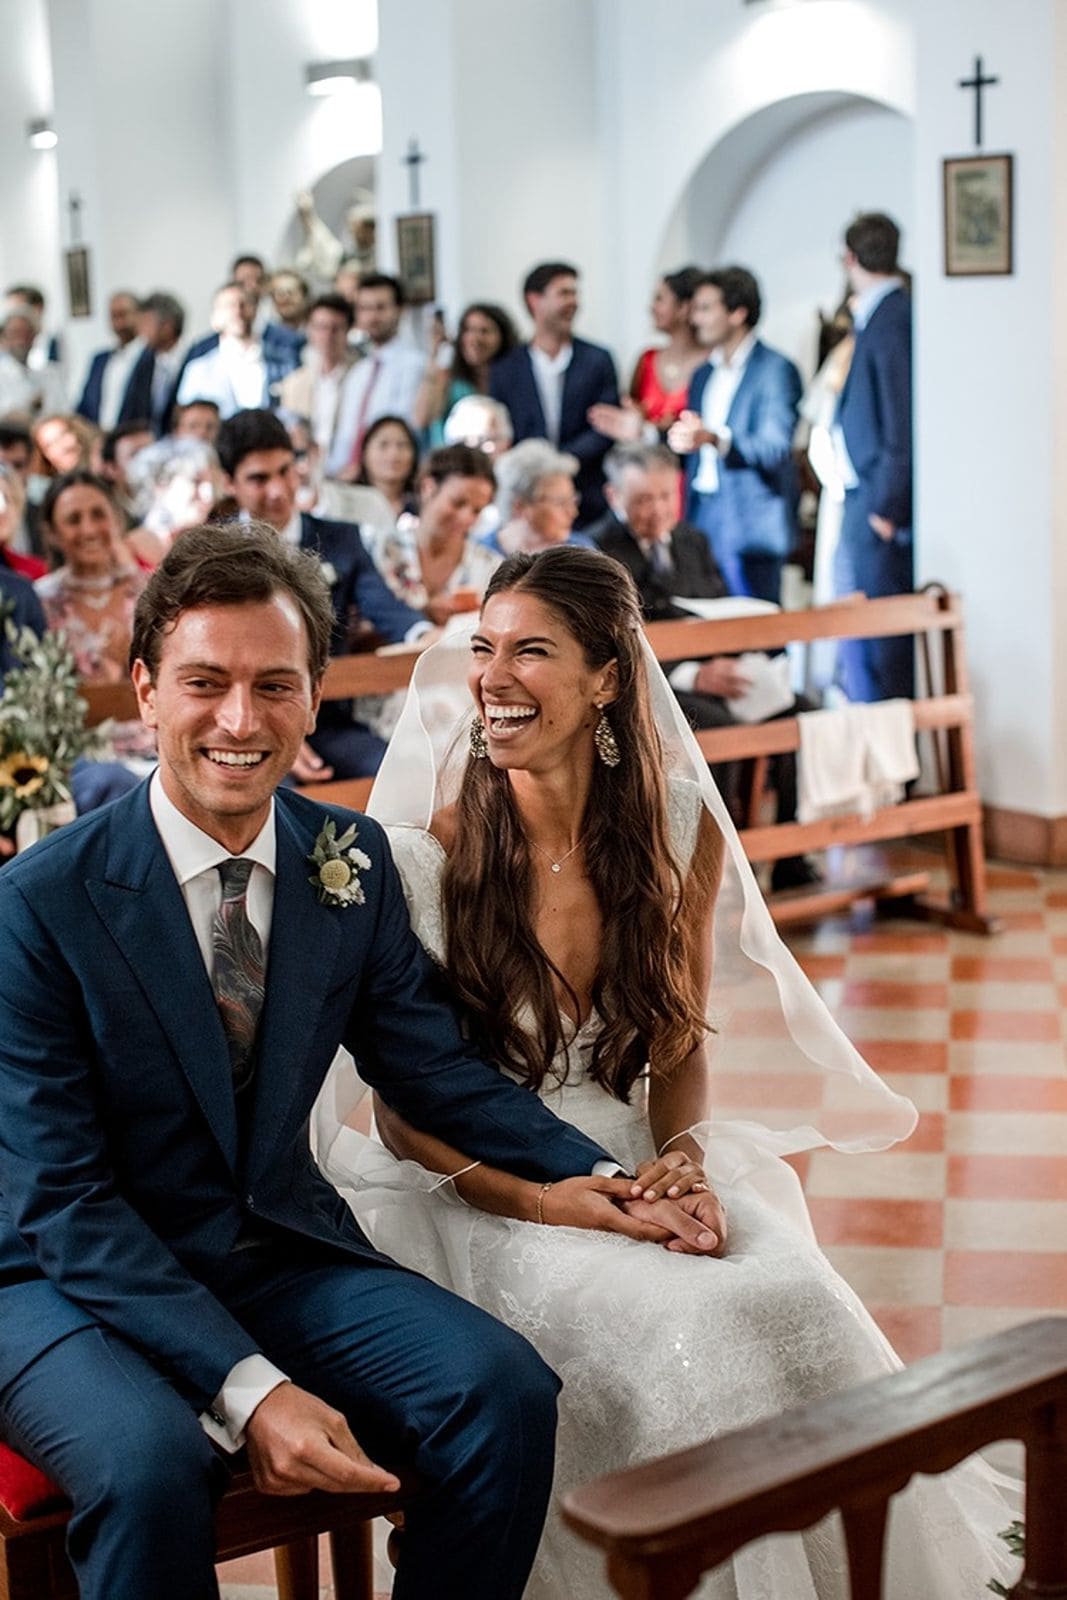 Bride and groom laughing during traditional Catholic wedding mass ceremony